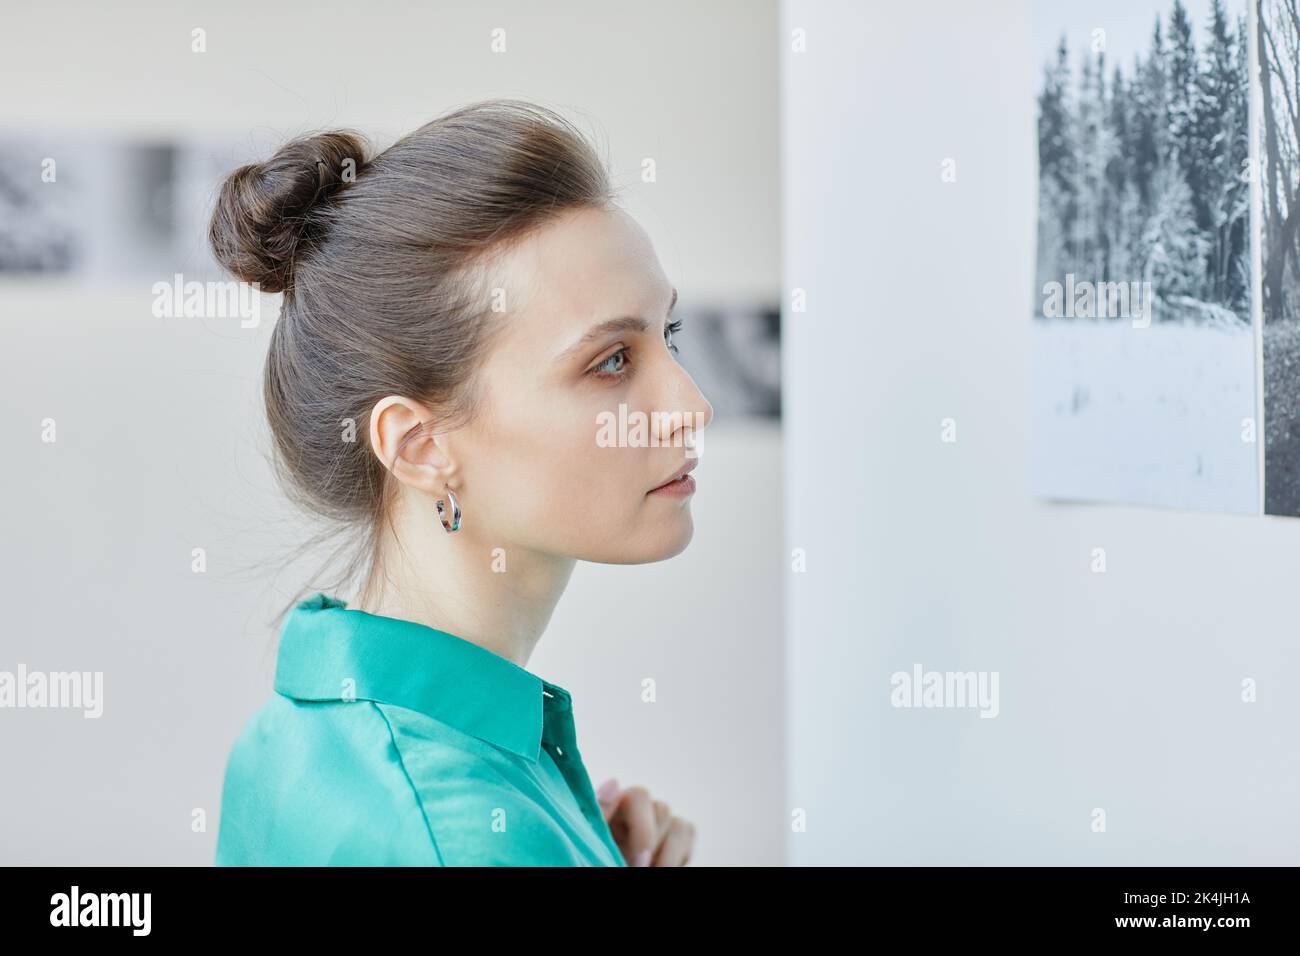 Minimal side view portrait of young woman with messy bun looking at art in gallery or museum Stock Photo